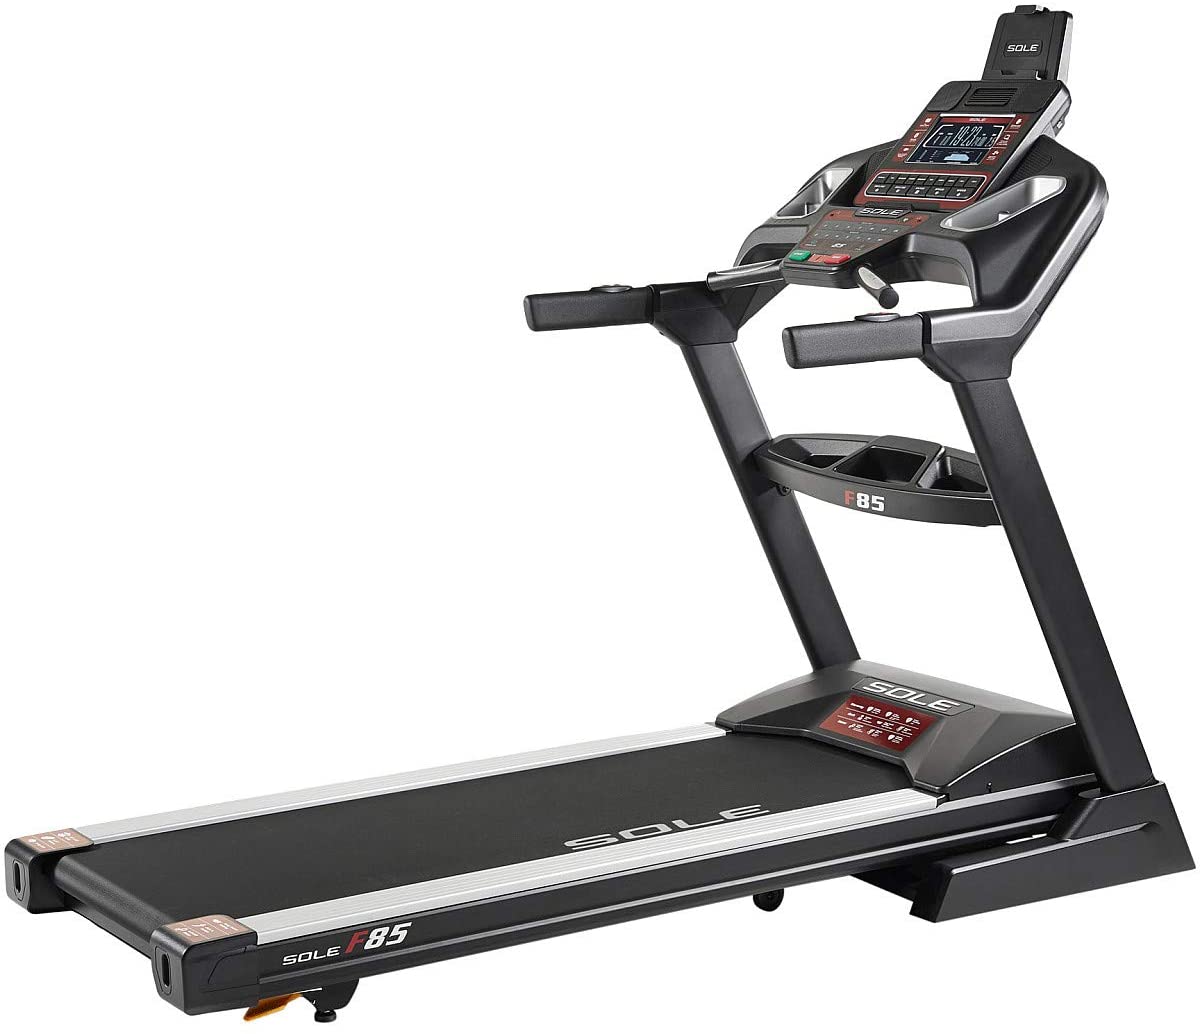 Sole F85 Treadmill Review 2020 - Improved Folding Model With Bluetooth